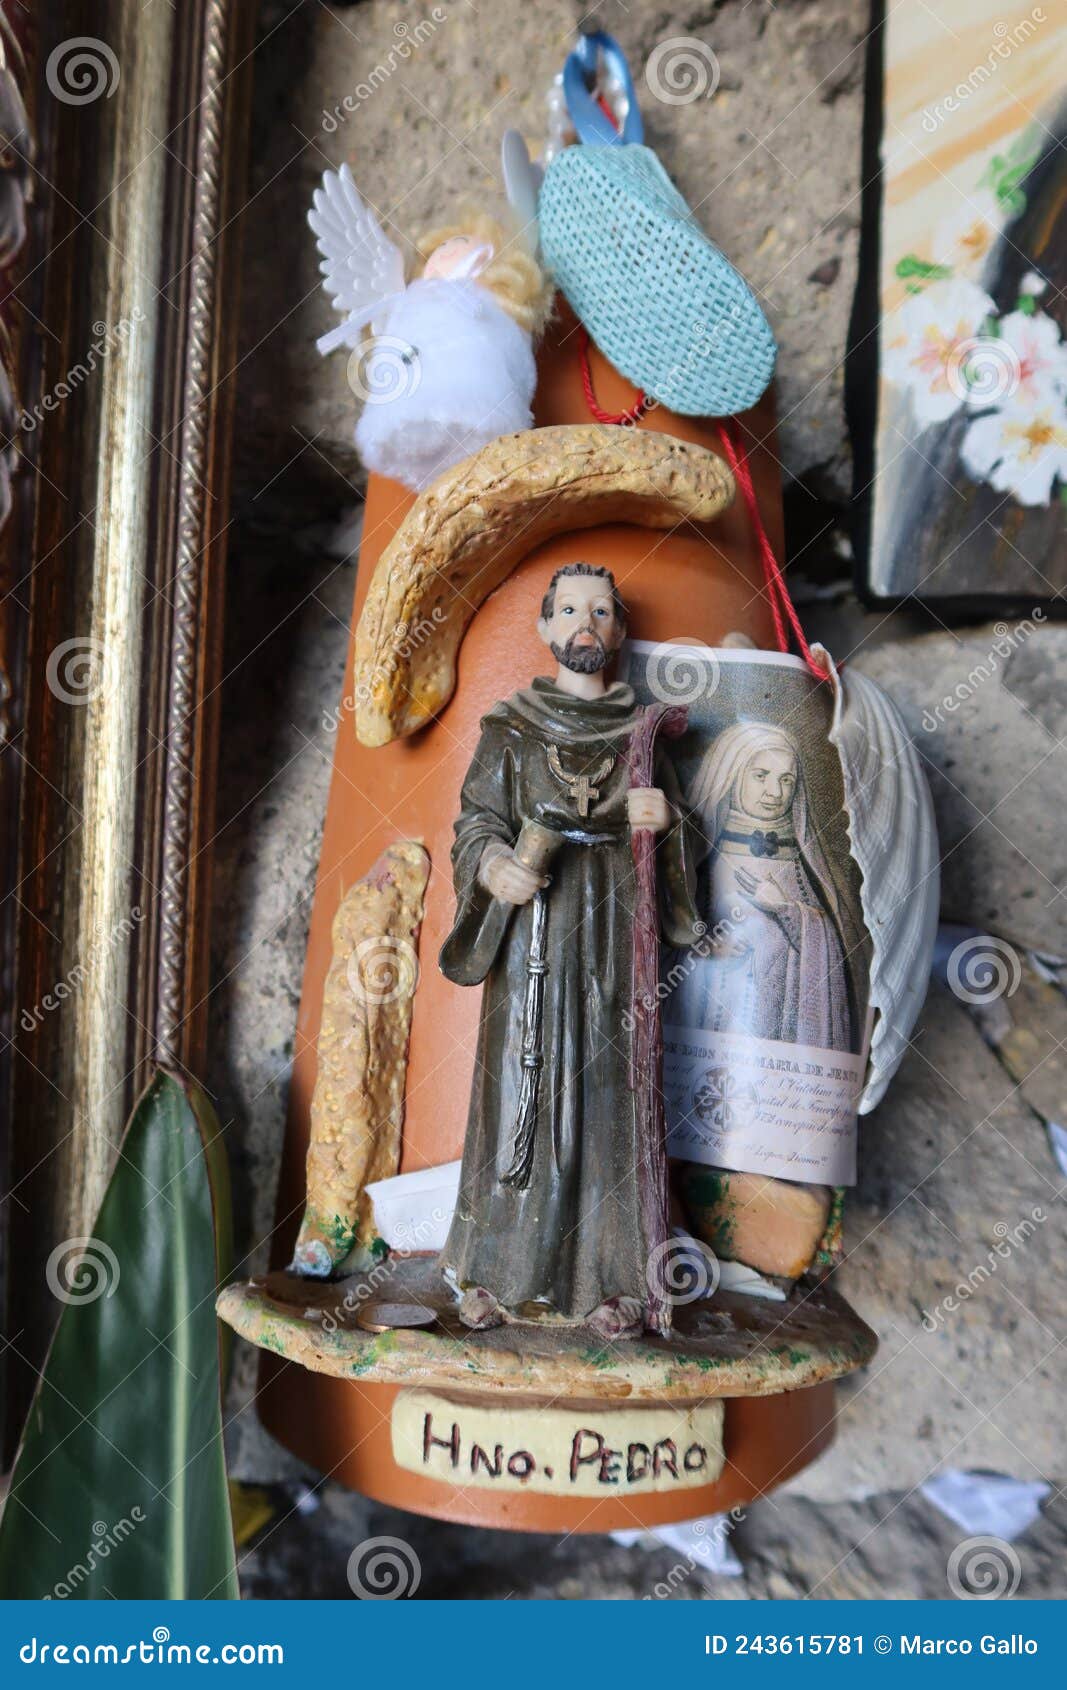 image of the saint in the cave sanctuary of hermano pedro de betancur, tenerife, canary islands, spain